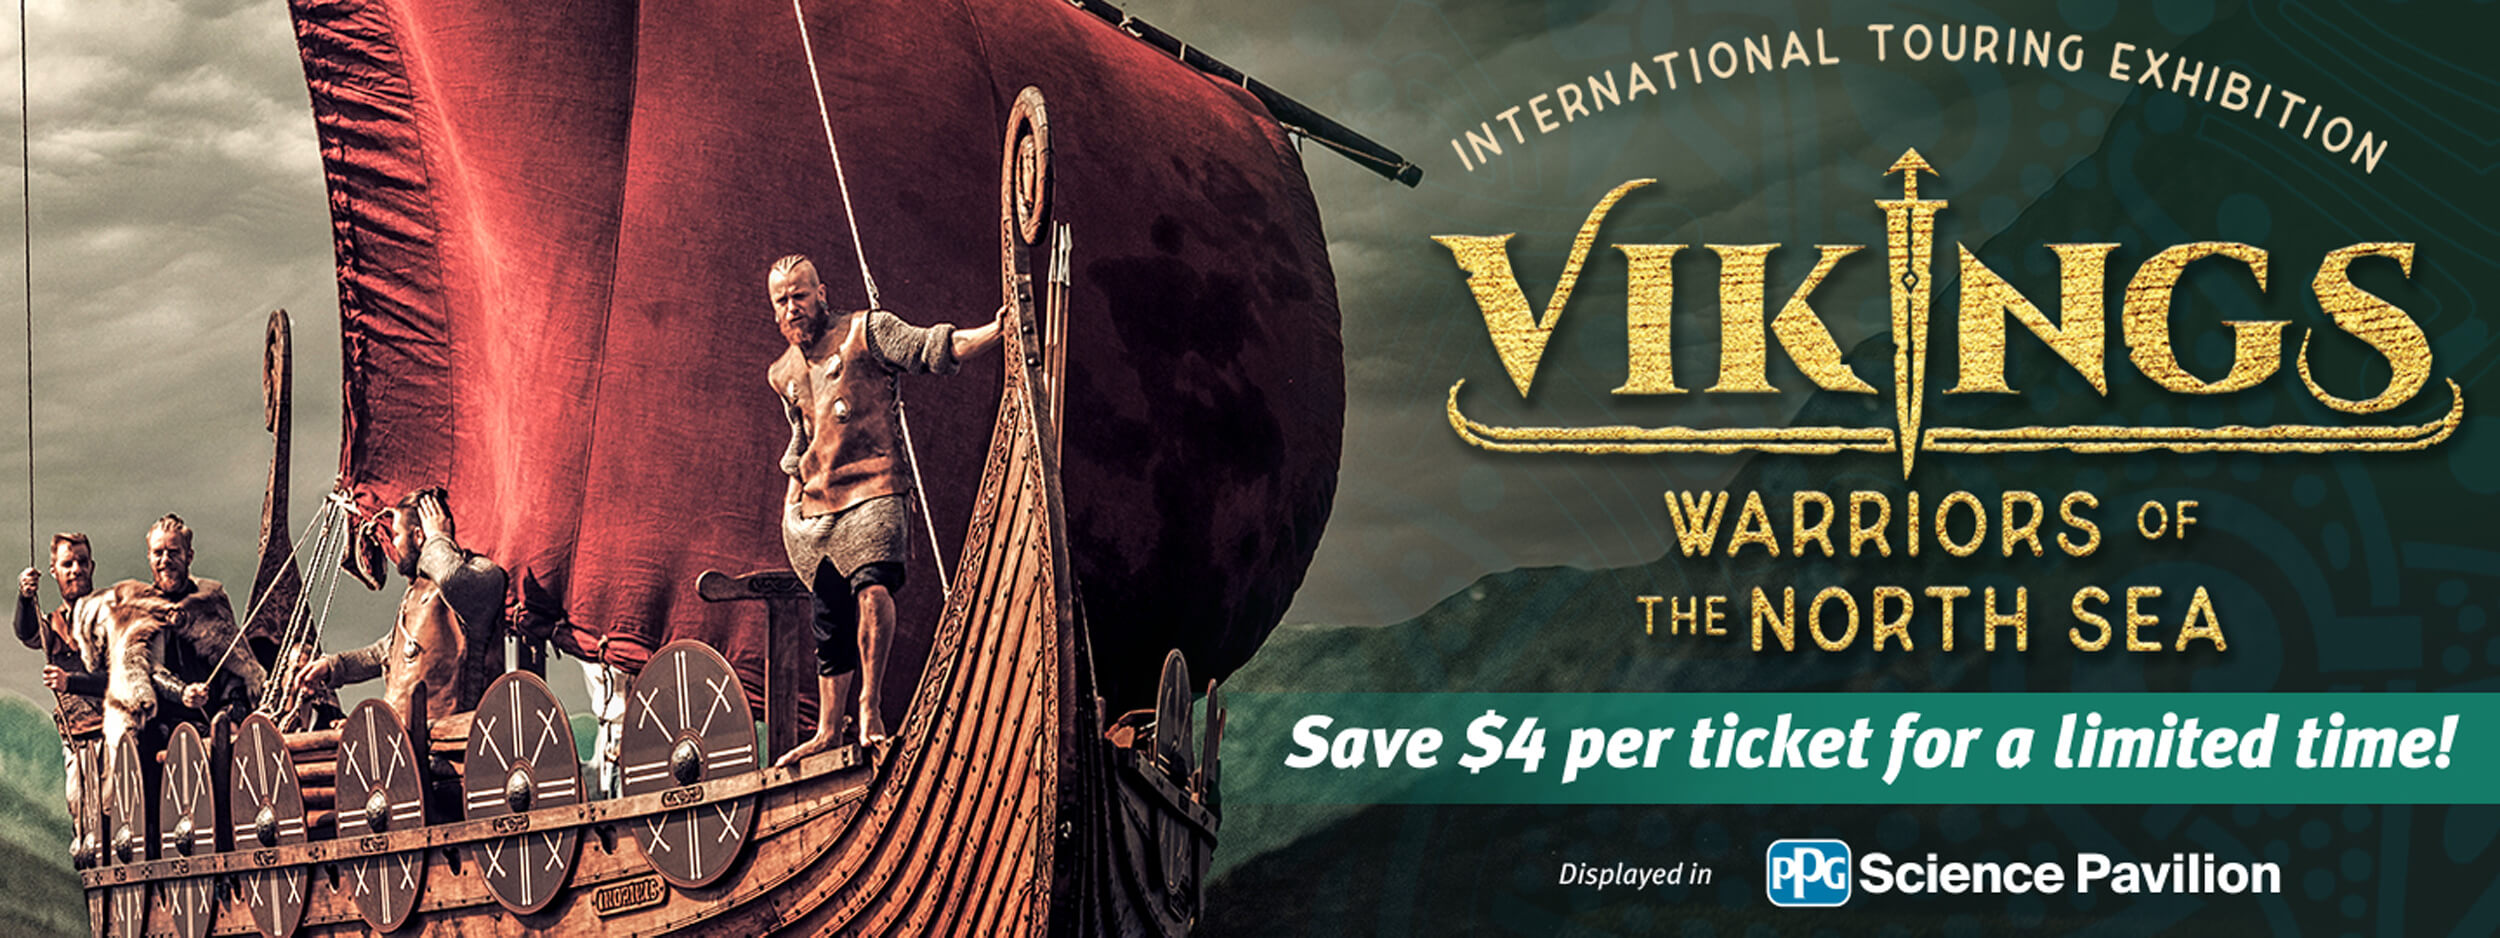 Vikings – Save $4 per ticket for a limited time!